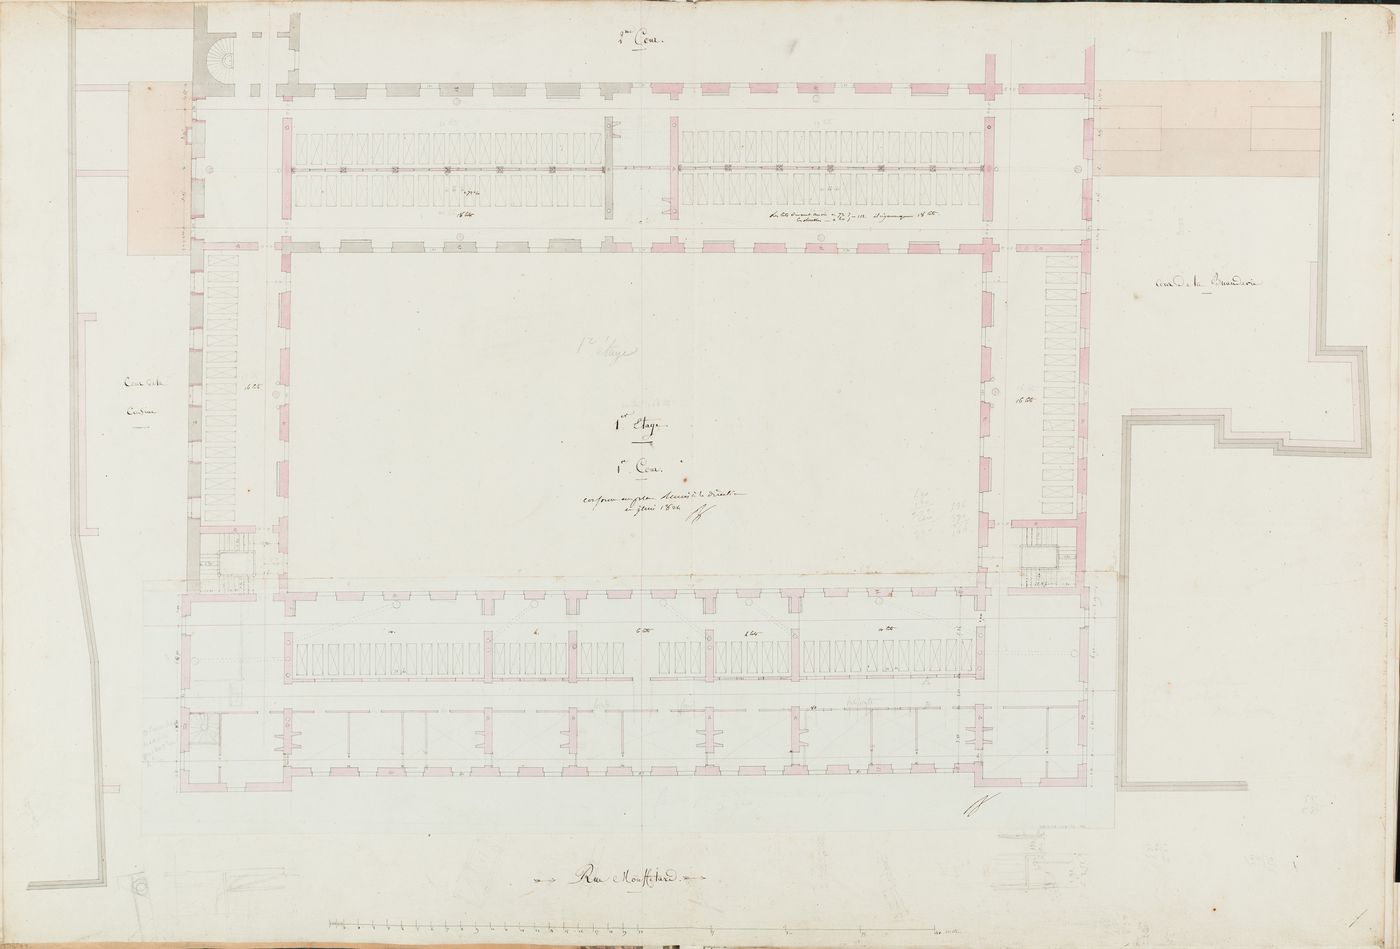 Project for the caserne de la Gendarmerie royale, rue Mouffetard: First floor plan for buildings surrounding the first courtyard